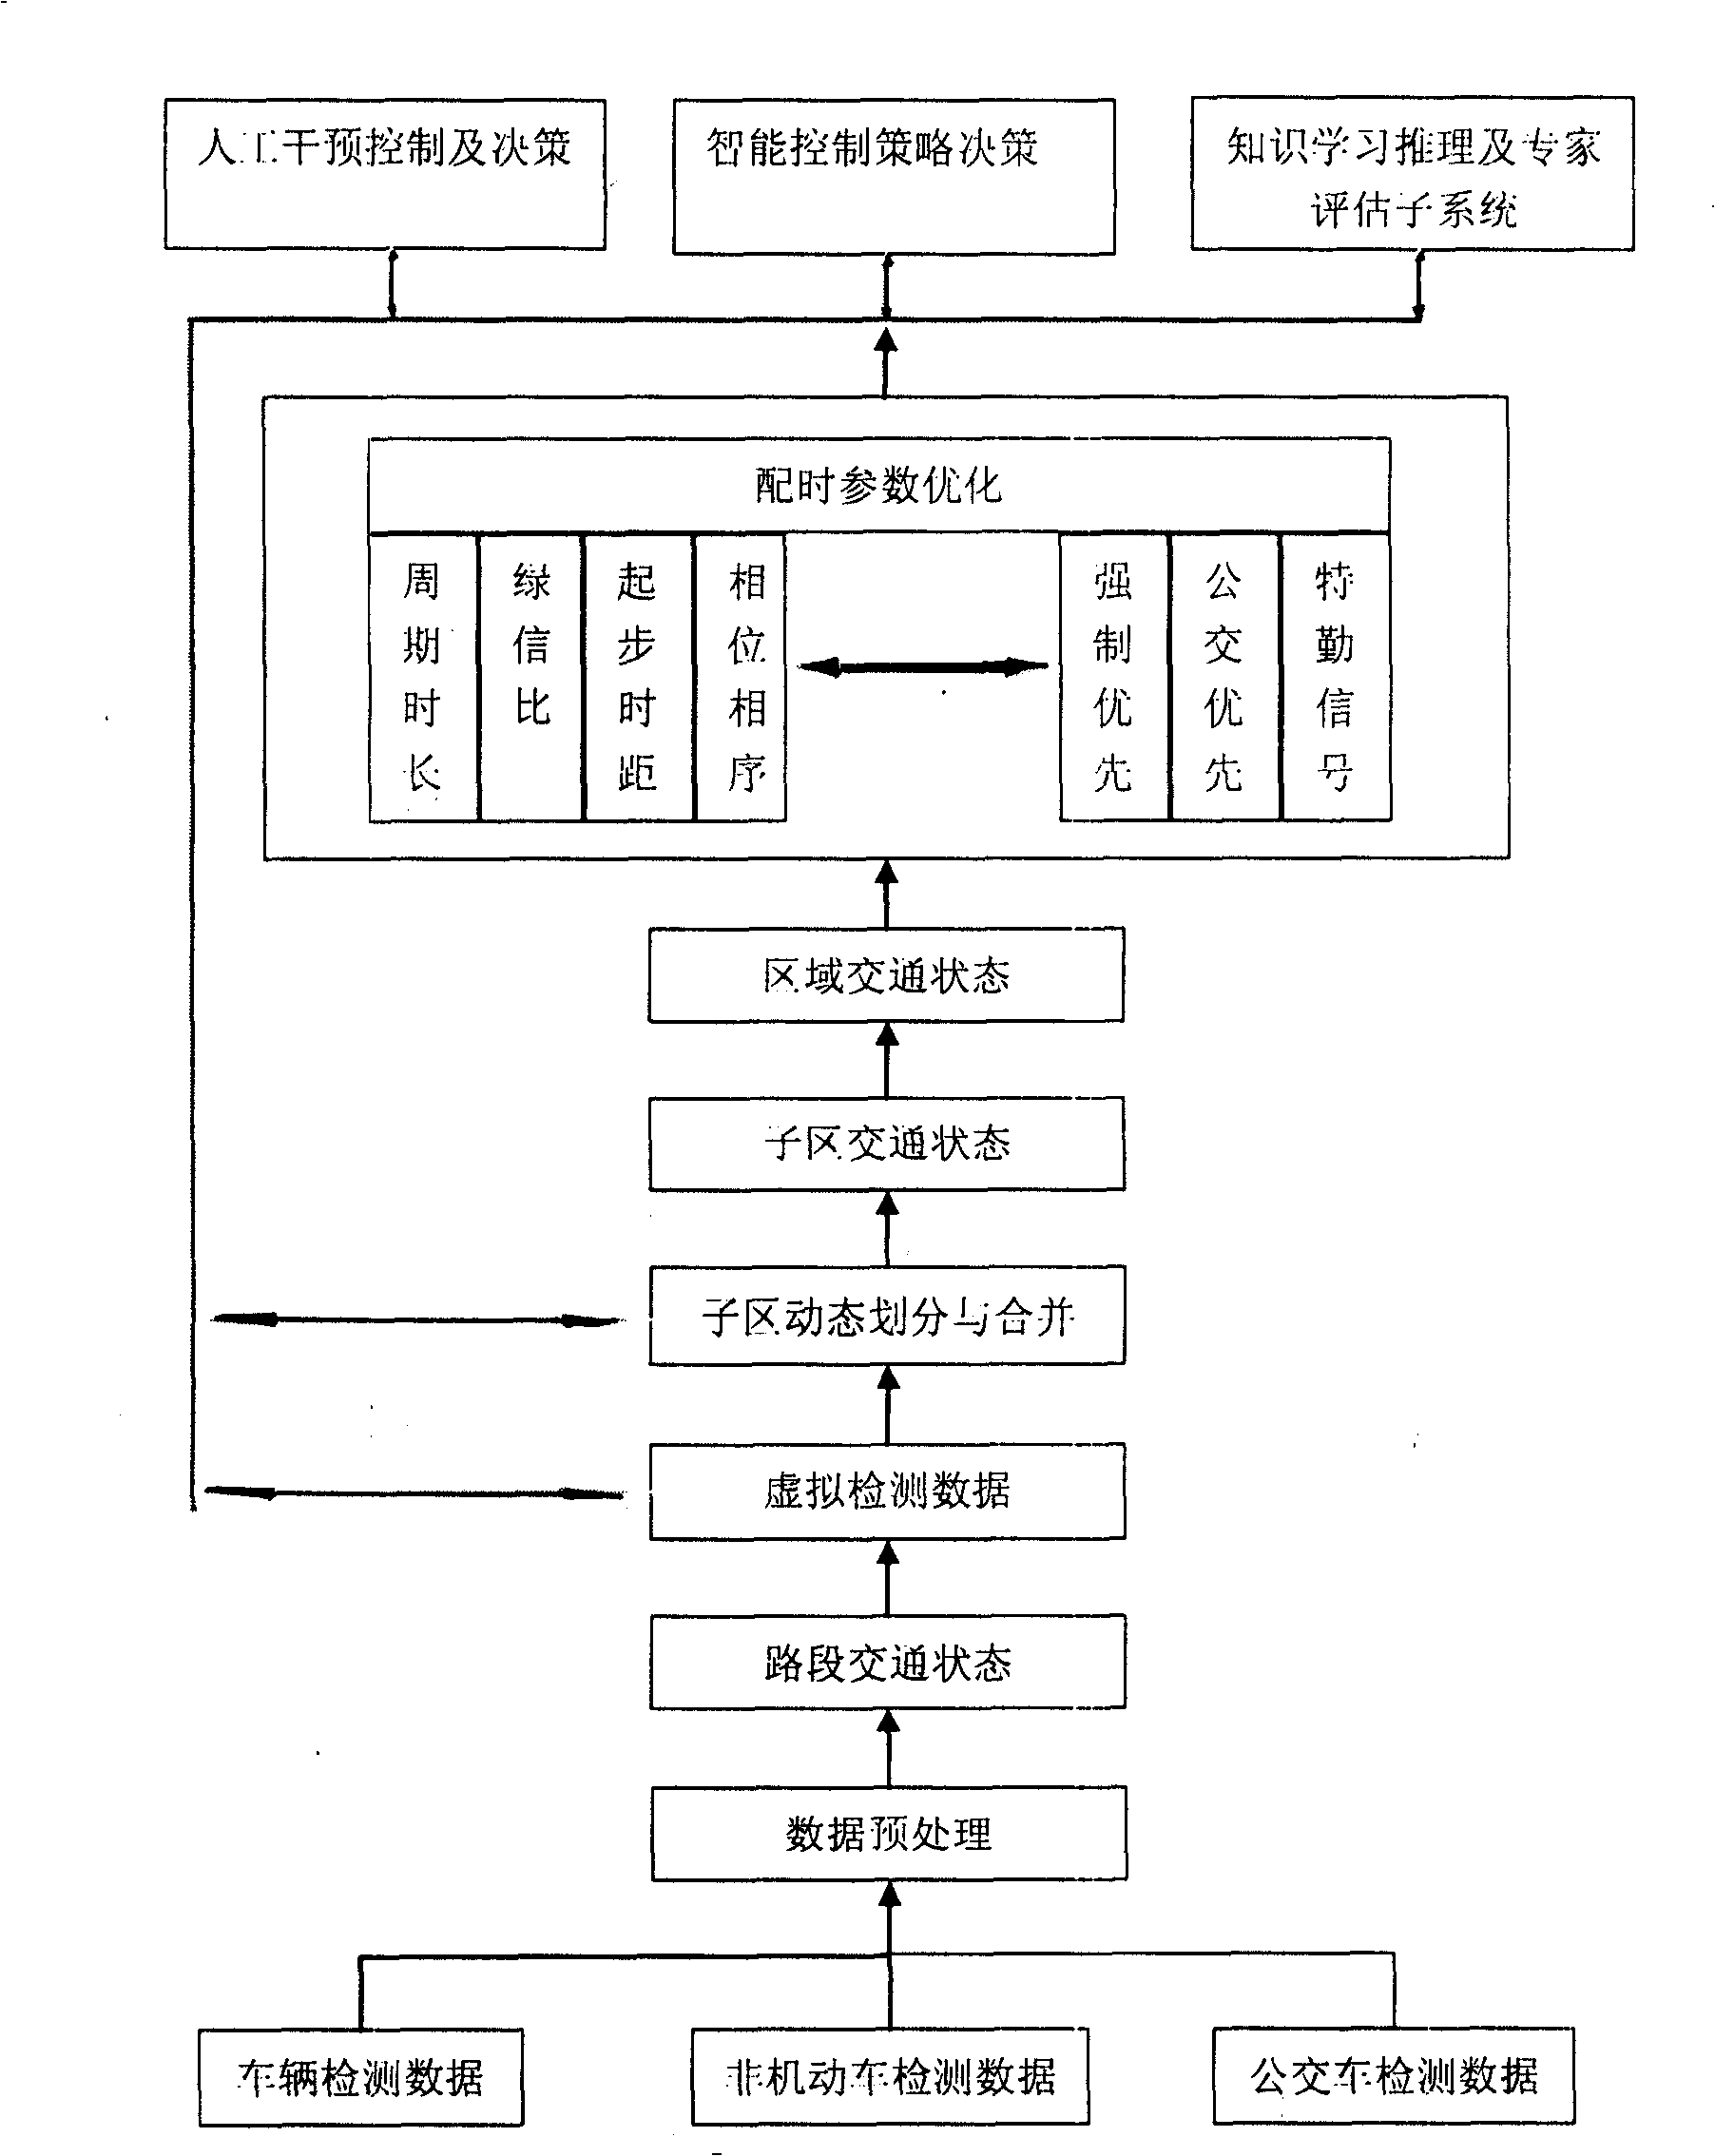 Coordination control method for area mixed traffic self-adaption signal